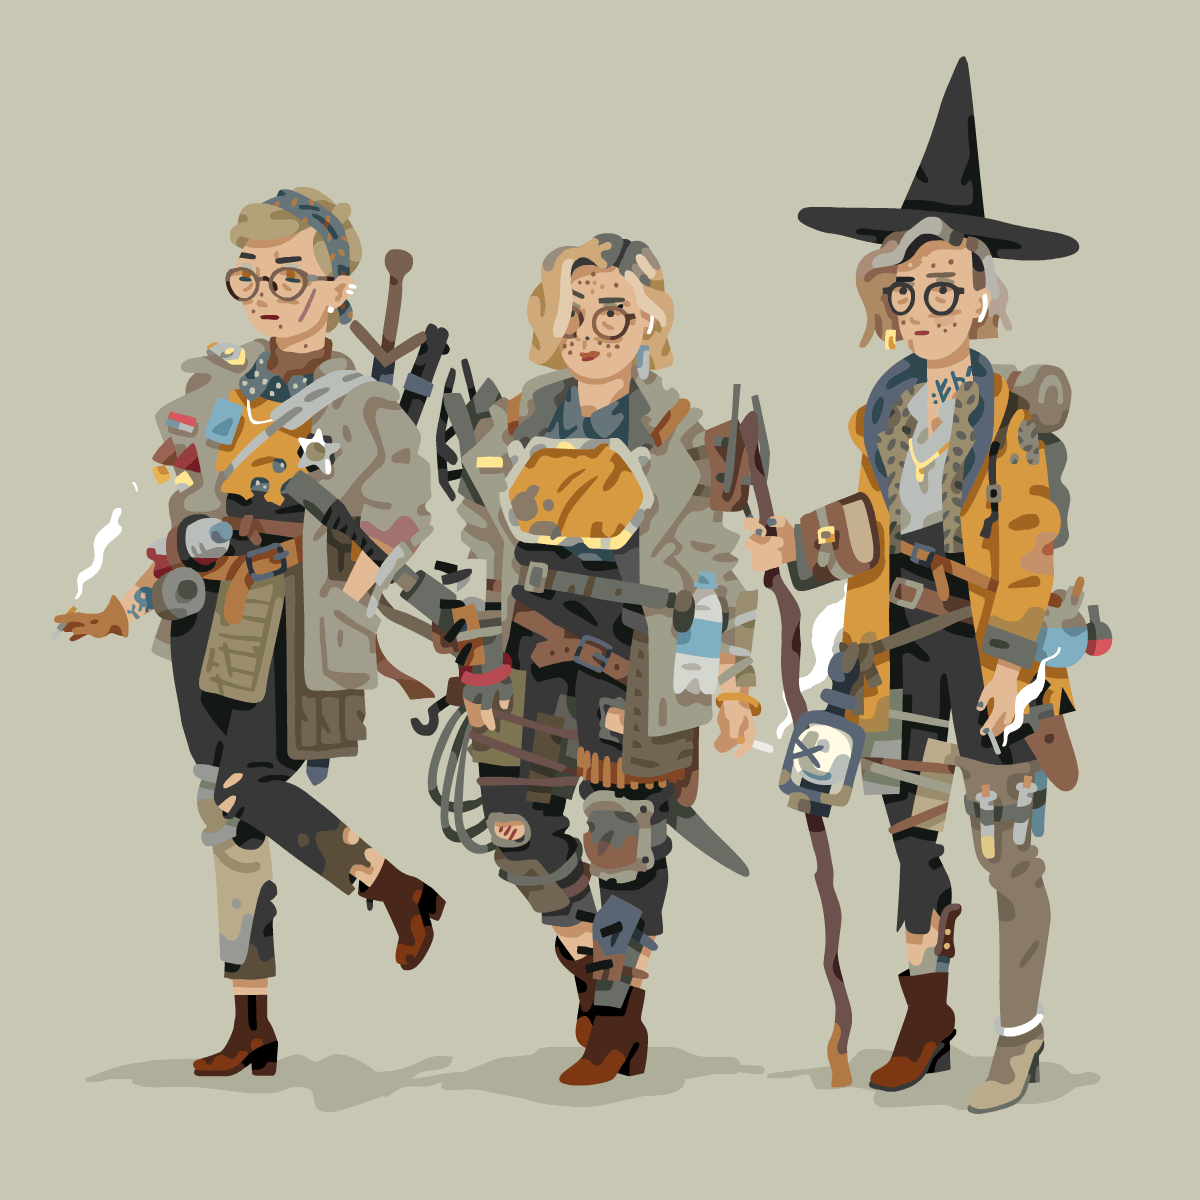 outfit post-apocalyptic sorceress classy